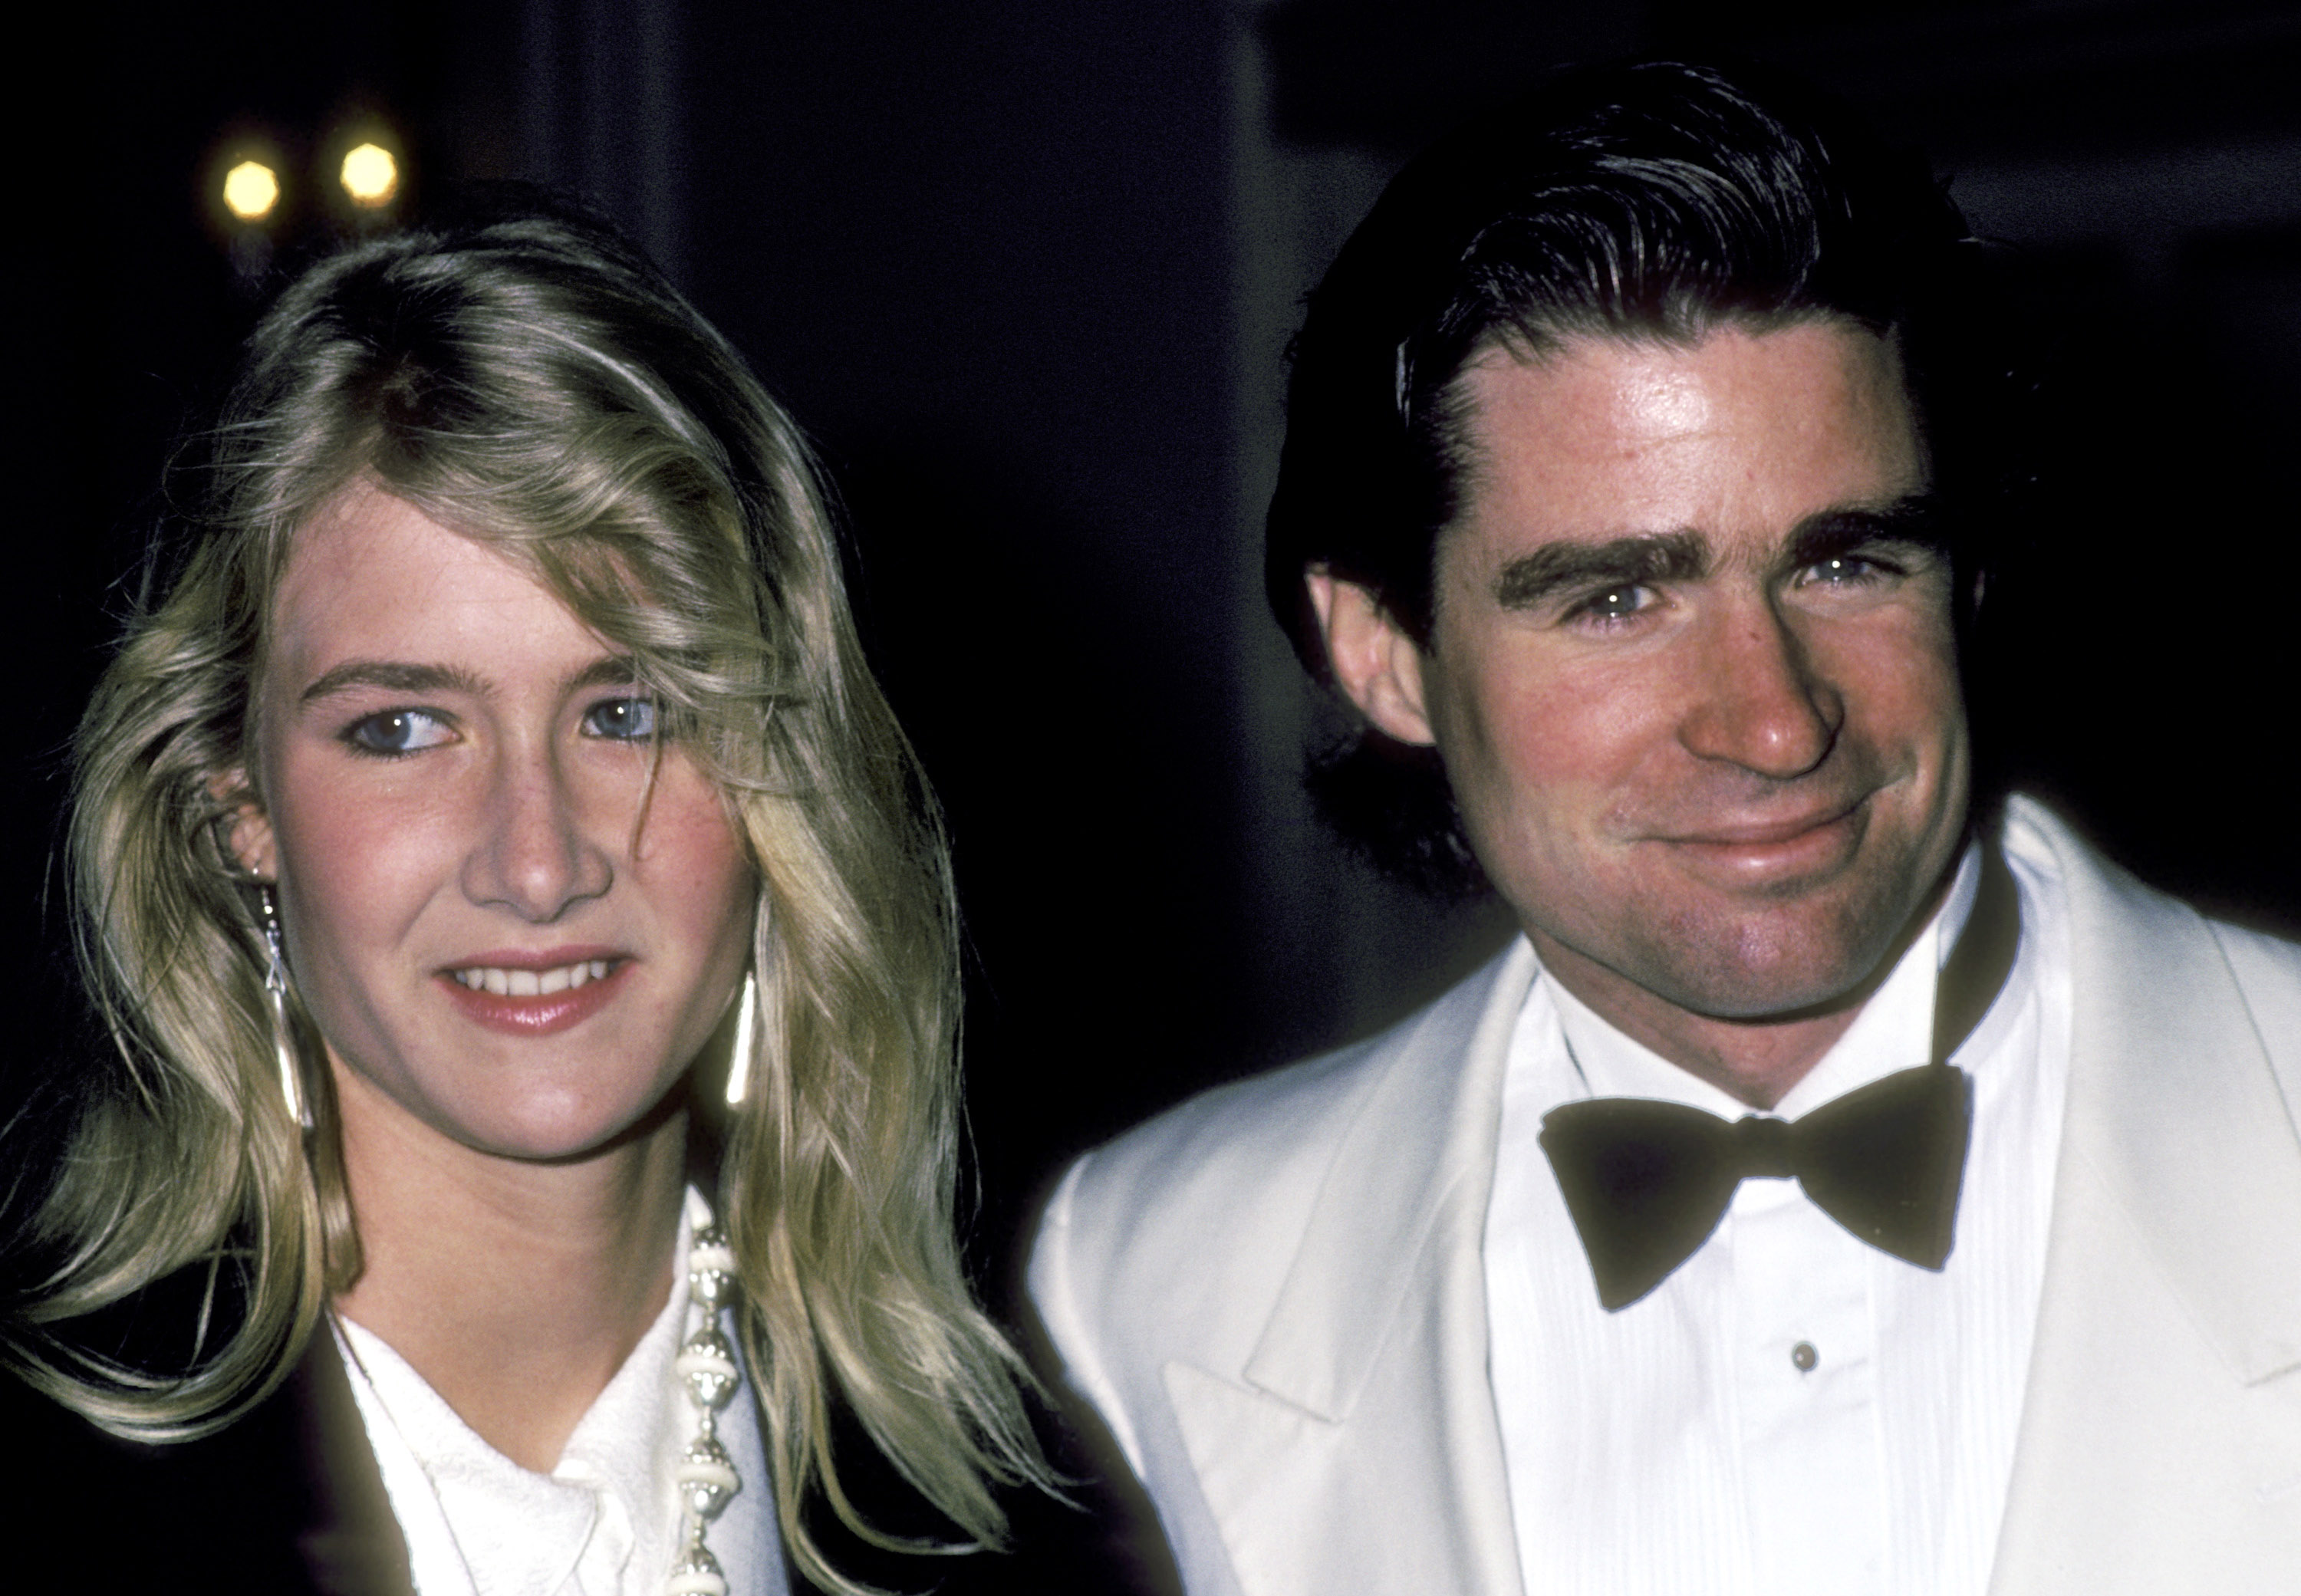 Laura Dern and Treat Williams in New York City on April 15, 1985 | Source: Getty Images